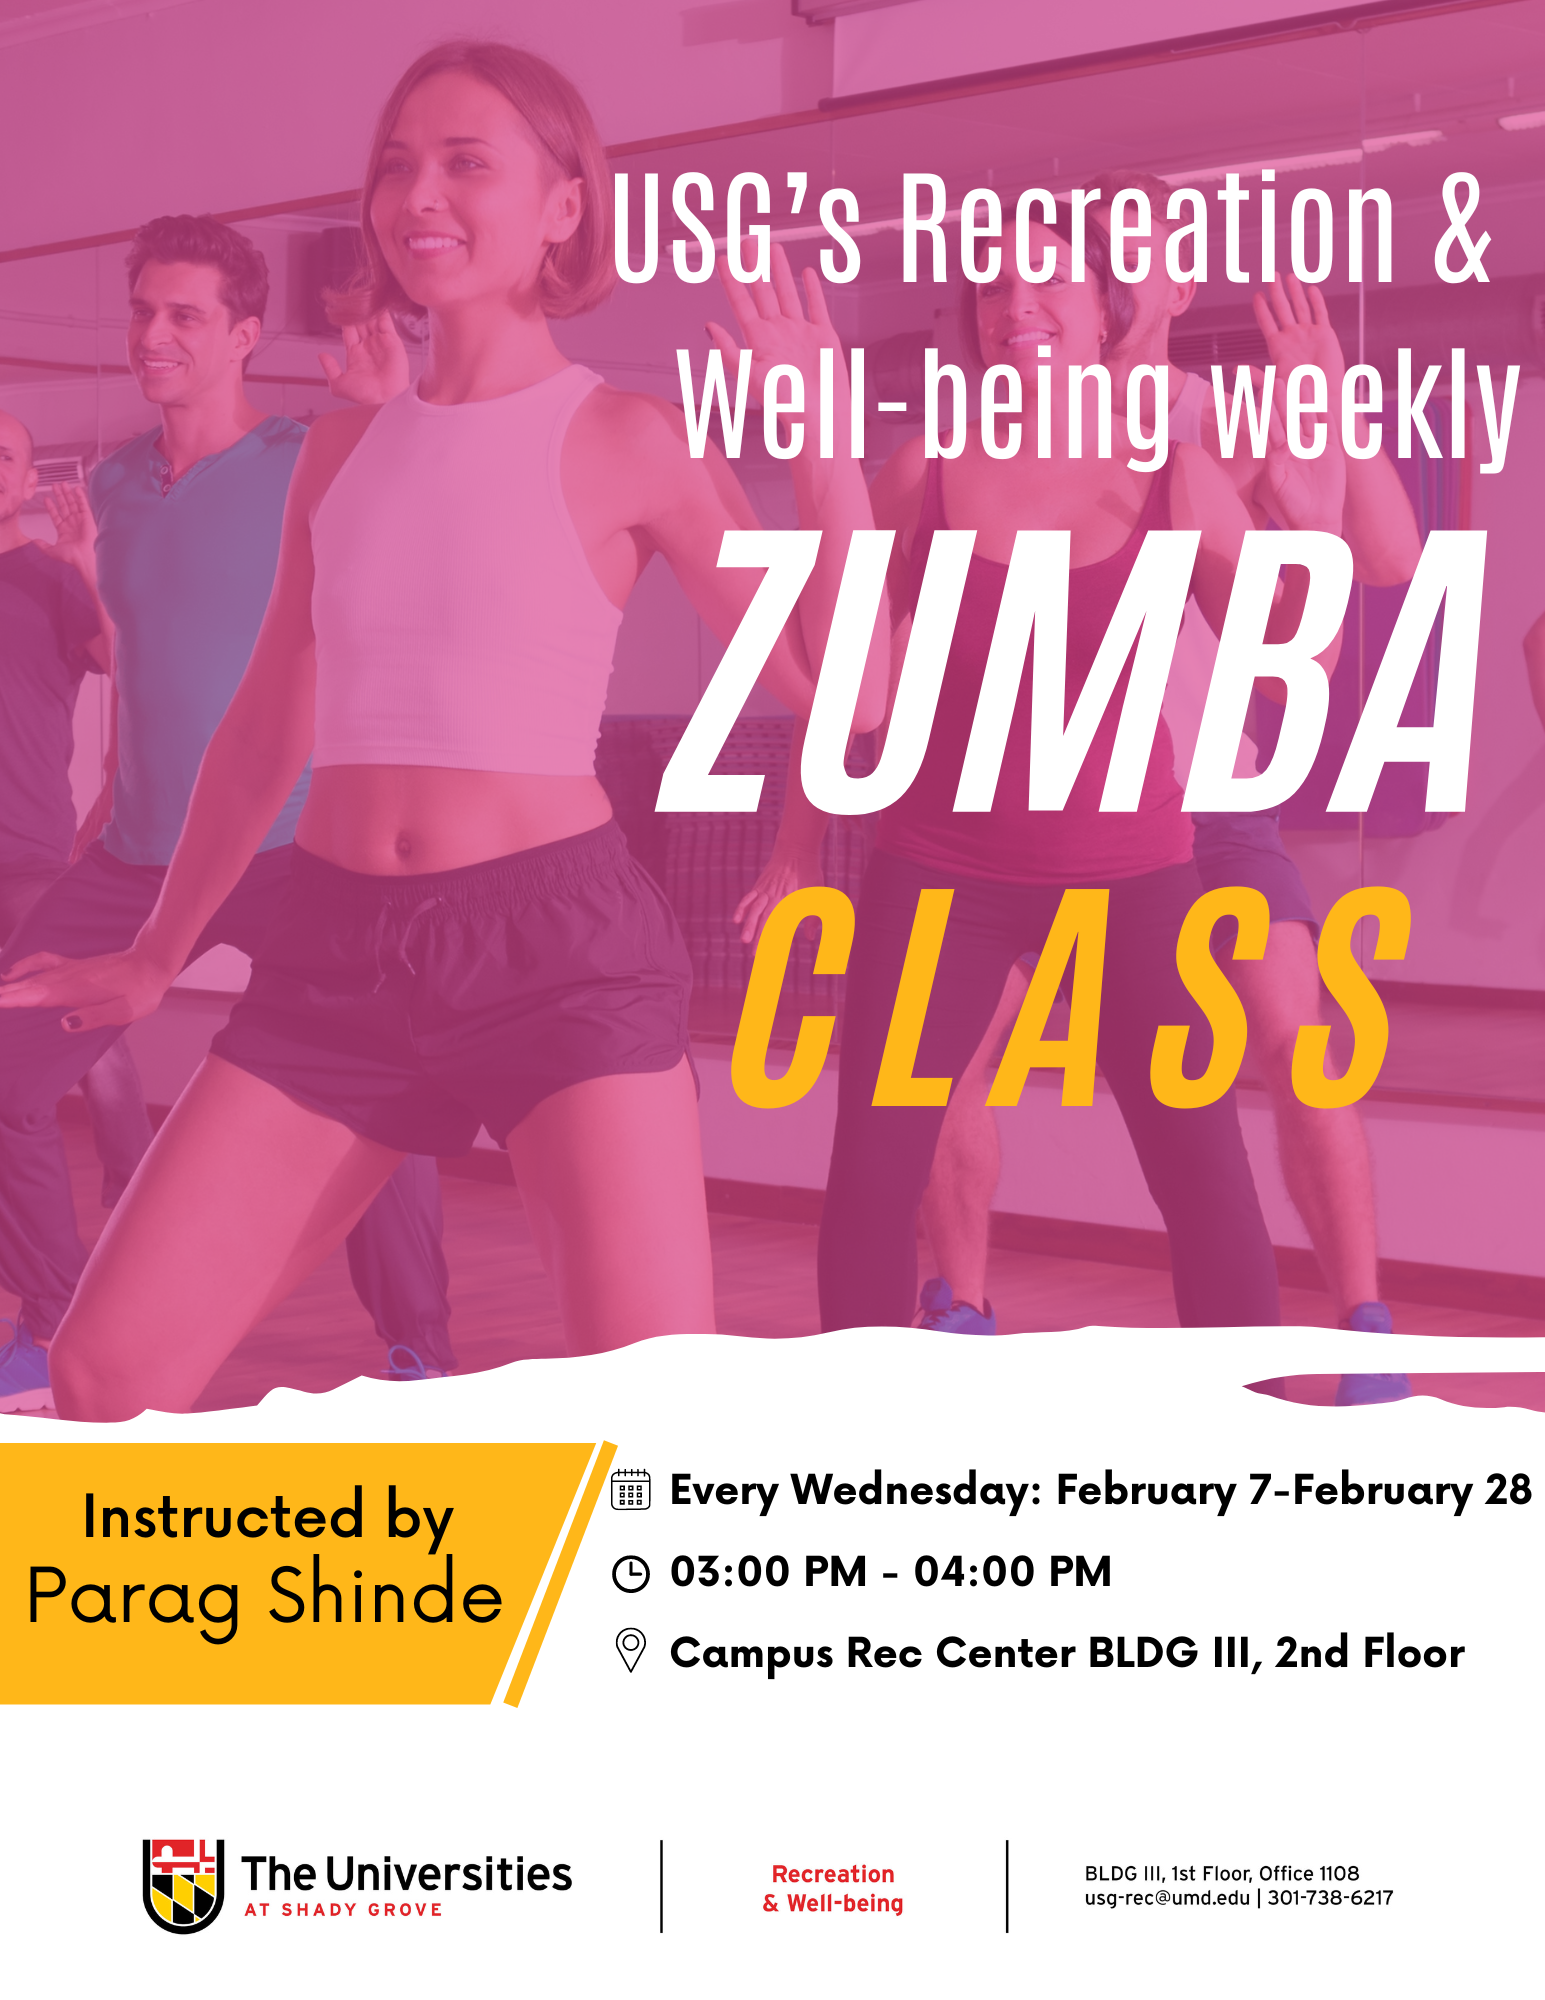  Every Wednesday: 2/7 - 2/28, Zumba class: 3-4PM.  Join USG’s Recreation and Well-being with a student instructor-led Zumba class! Work on your fitness while dancing to upbeat music. All are welcome! Location: Campus Rec Center BLDG III, 2nd Floor